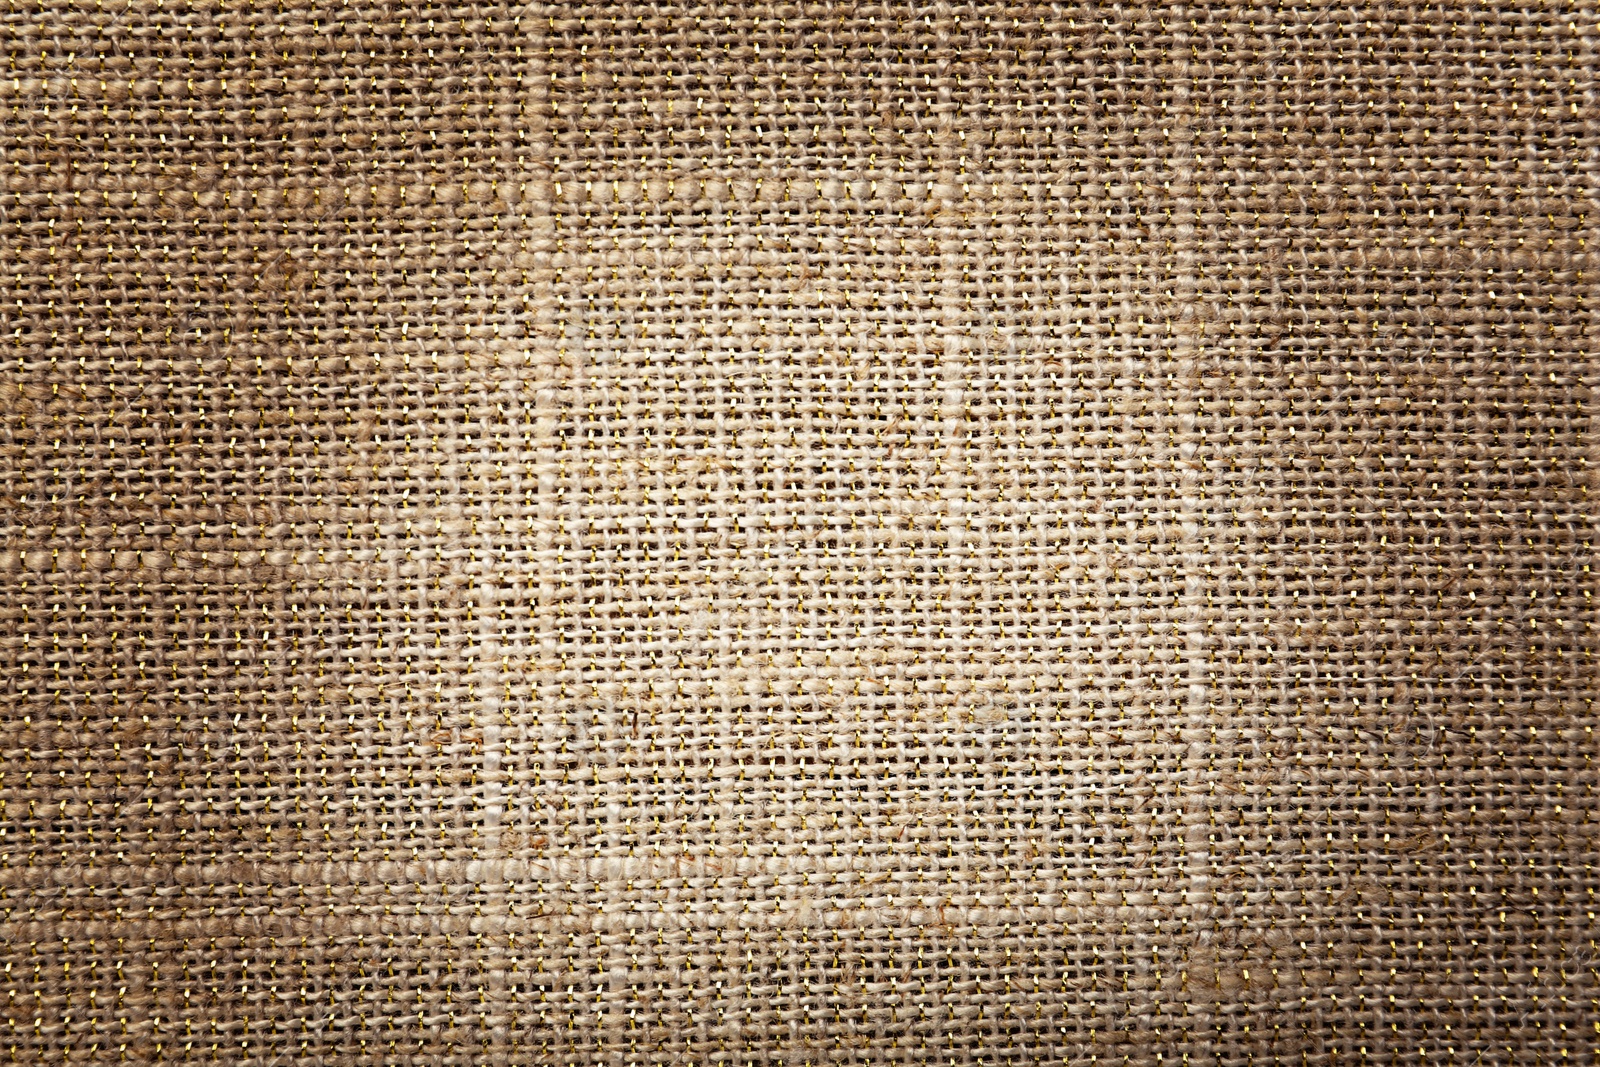 Image of Texture of natural burlap fabric as background, top view. Vignette effect 